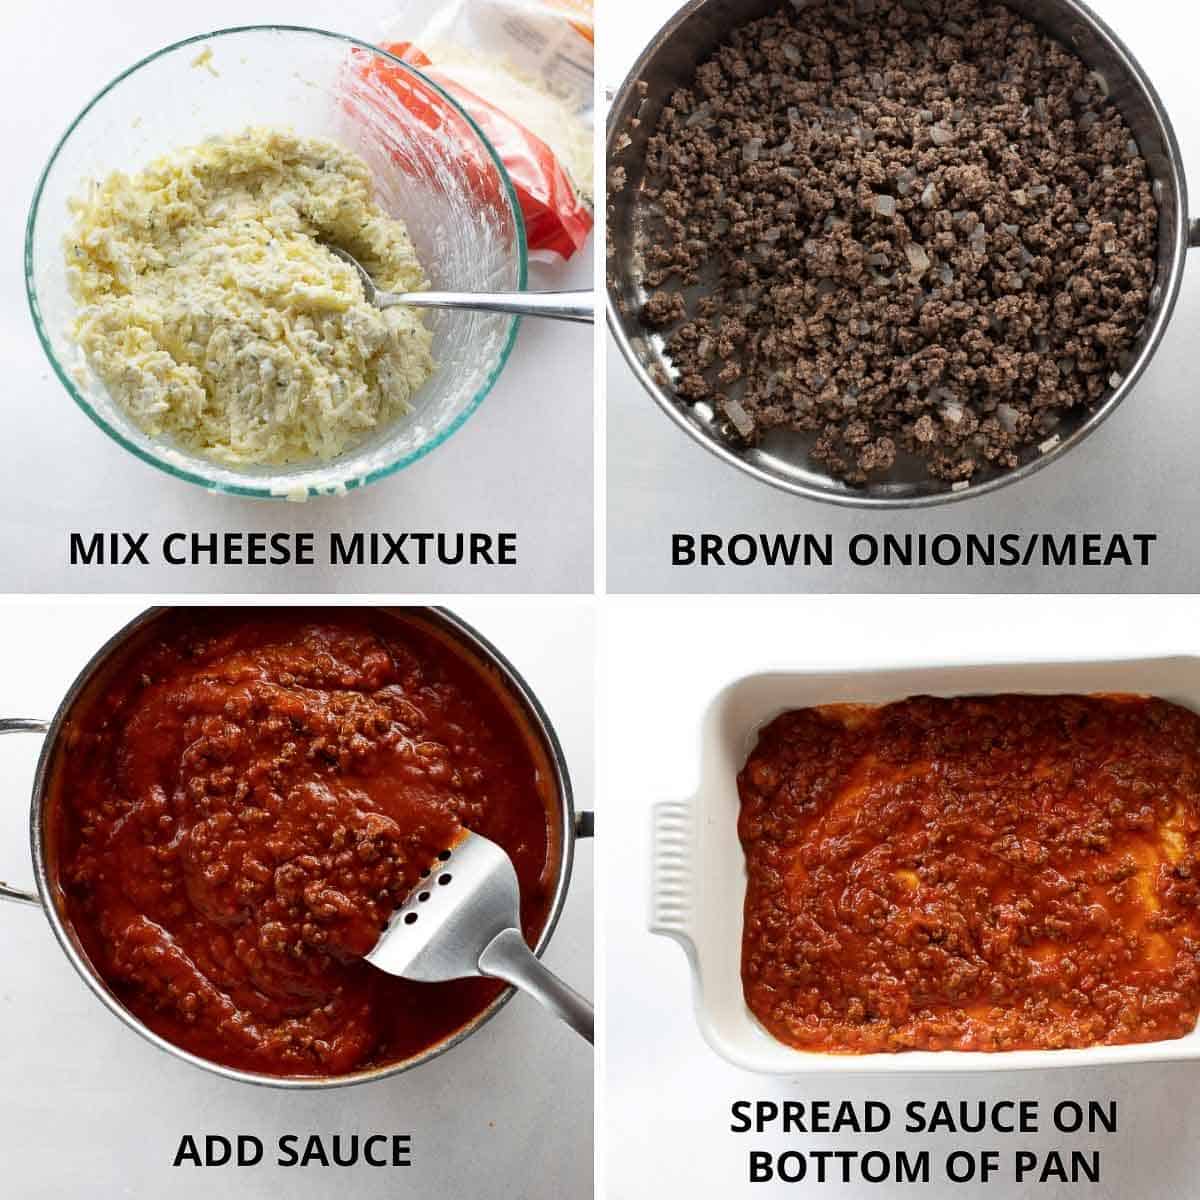 steps for how to make the cheese and sauce mixtures